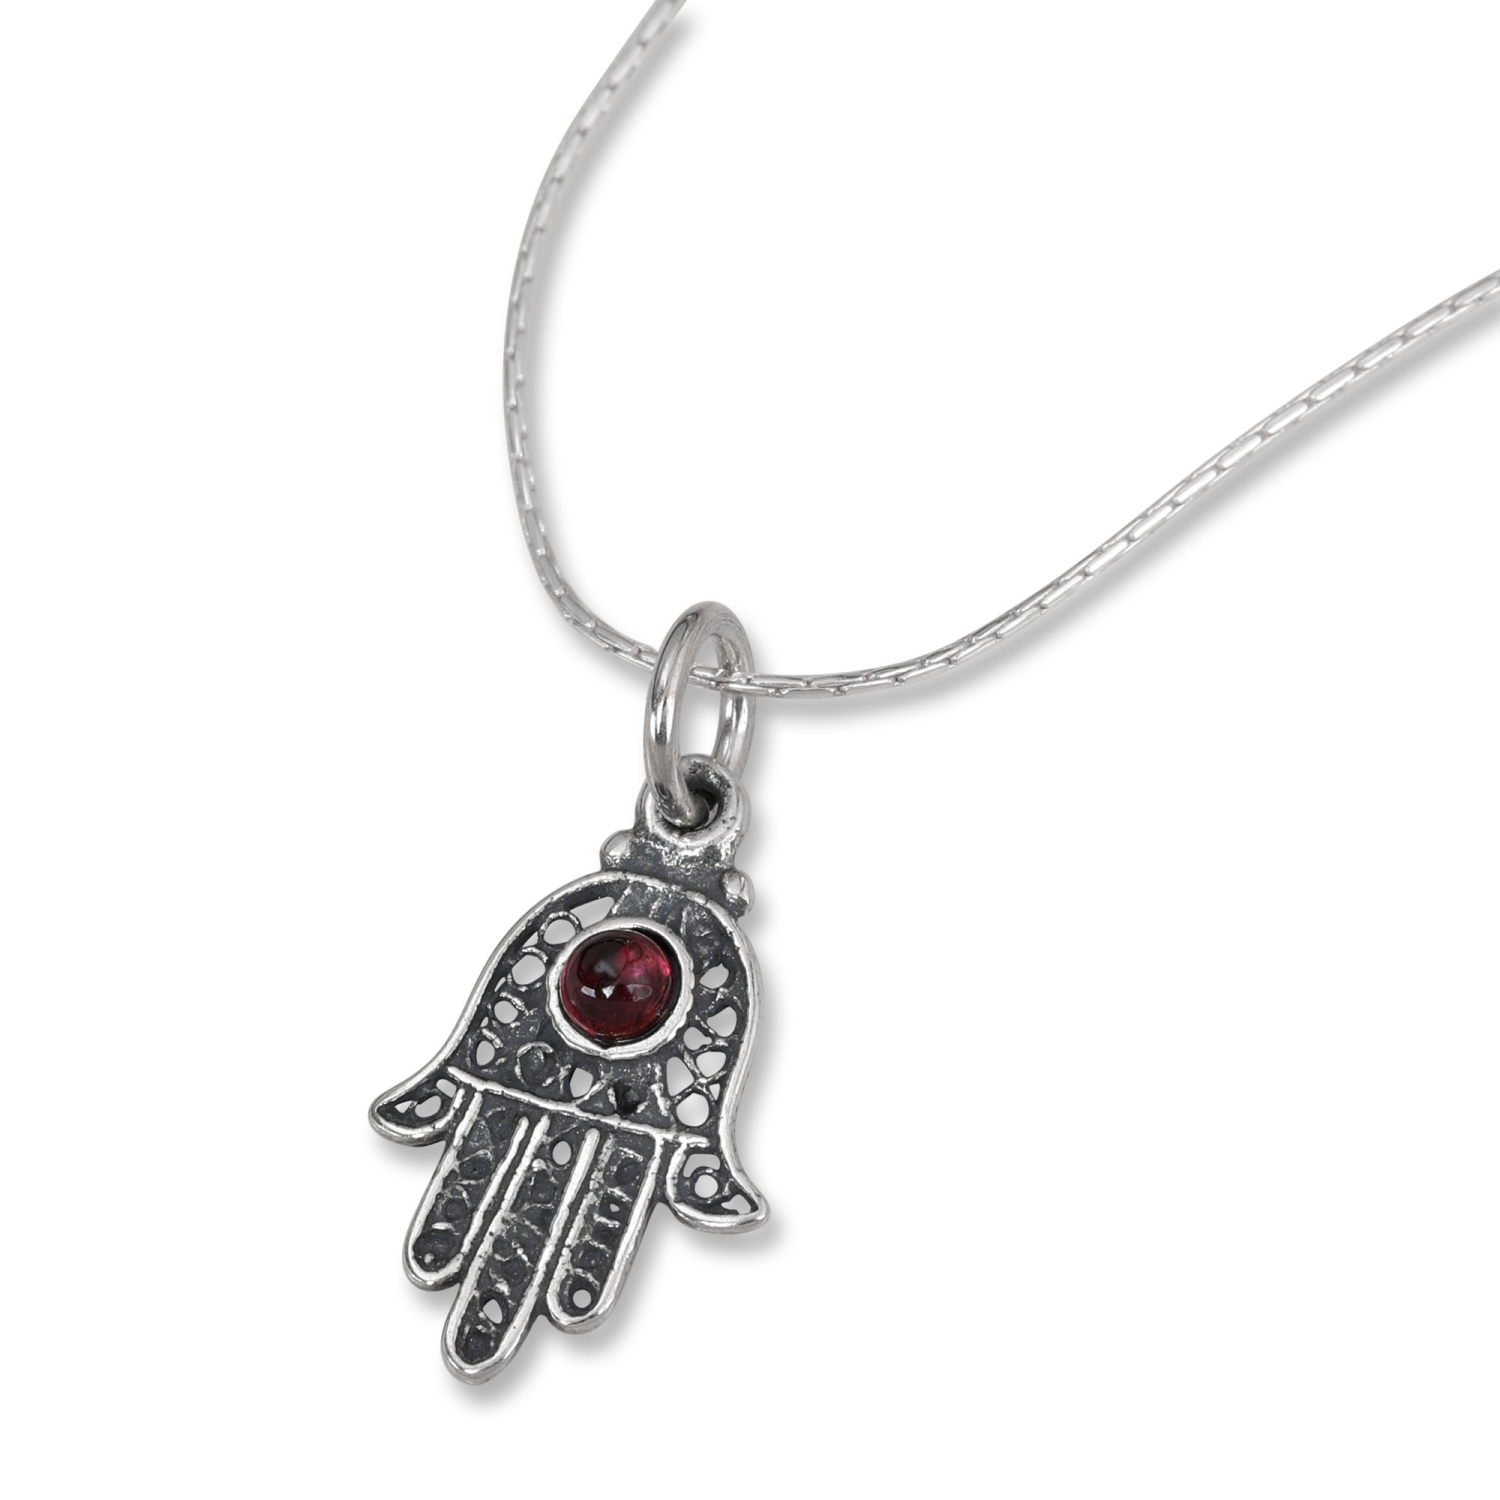 Galis Jewelry Sterling Silver Hamsa Necklace with Garnet Stone - 1